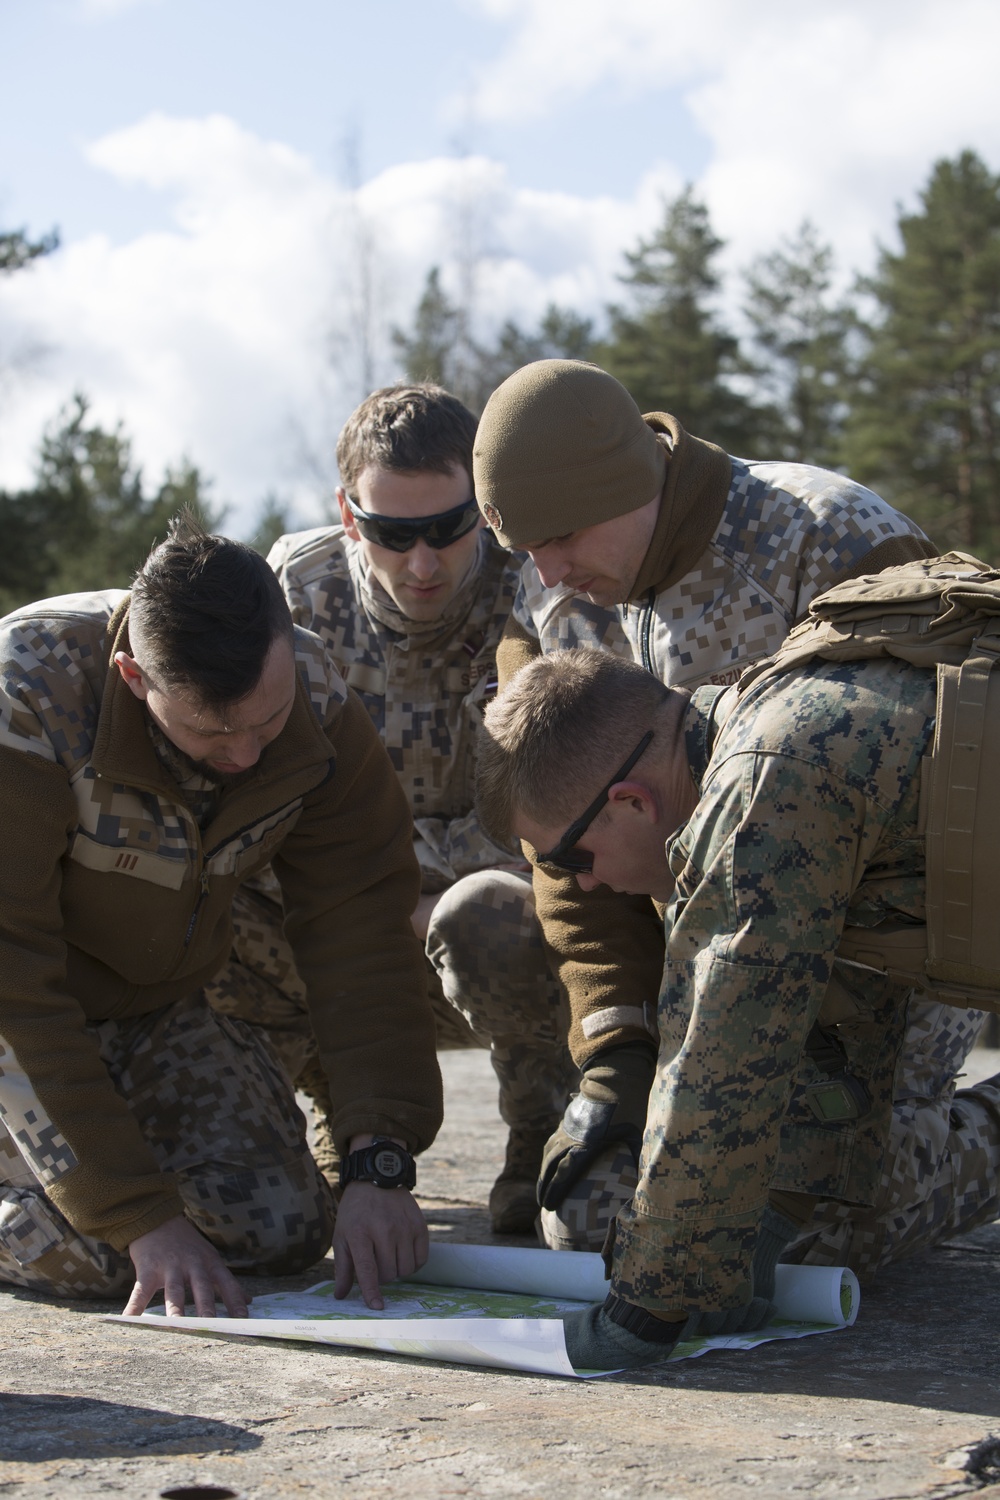 BSRF 17.1Marines with combined anti-armor team train with NATO Allies